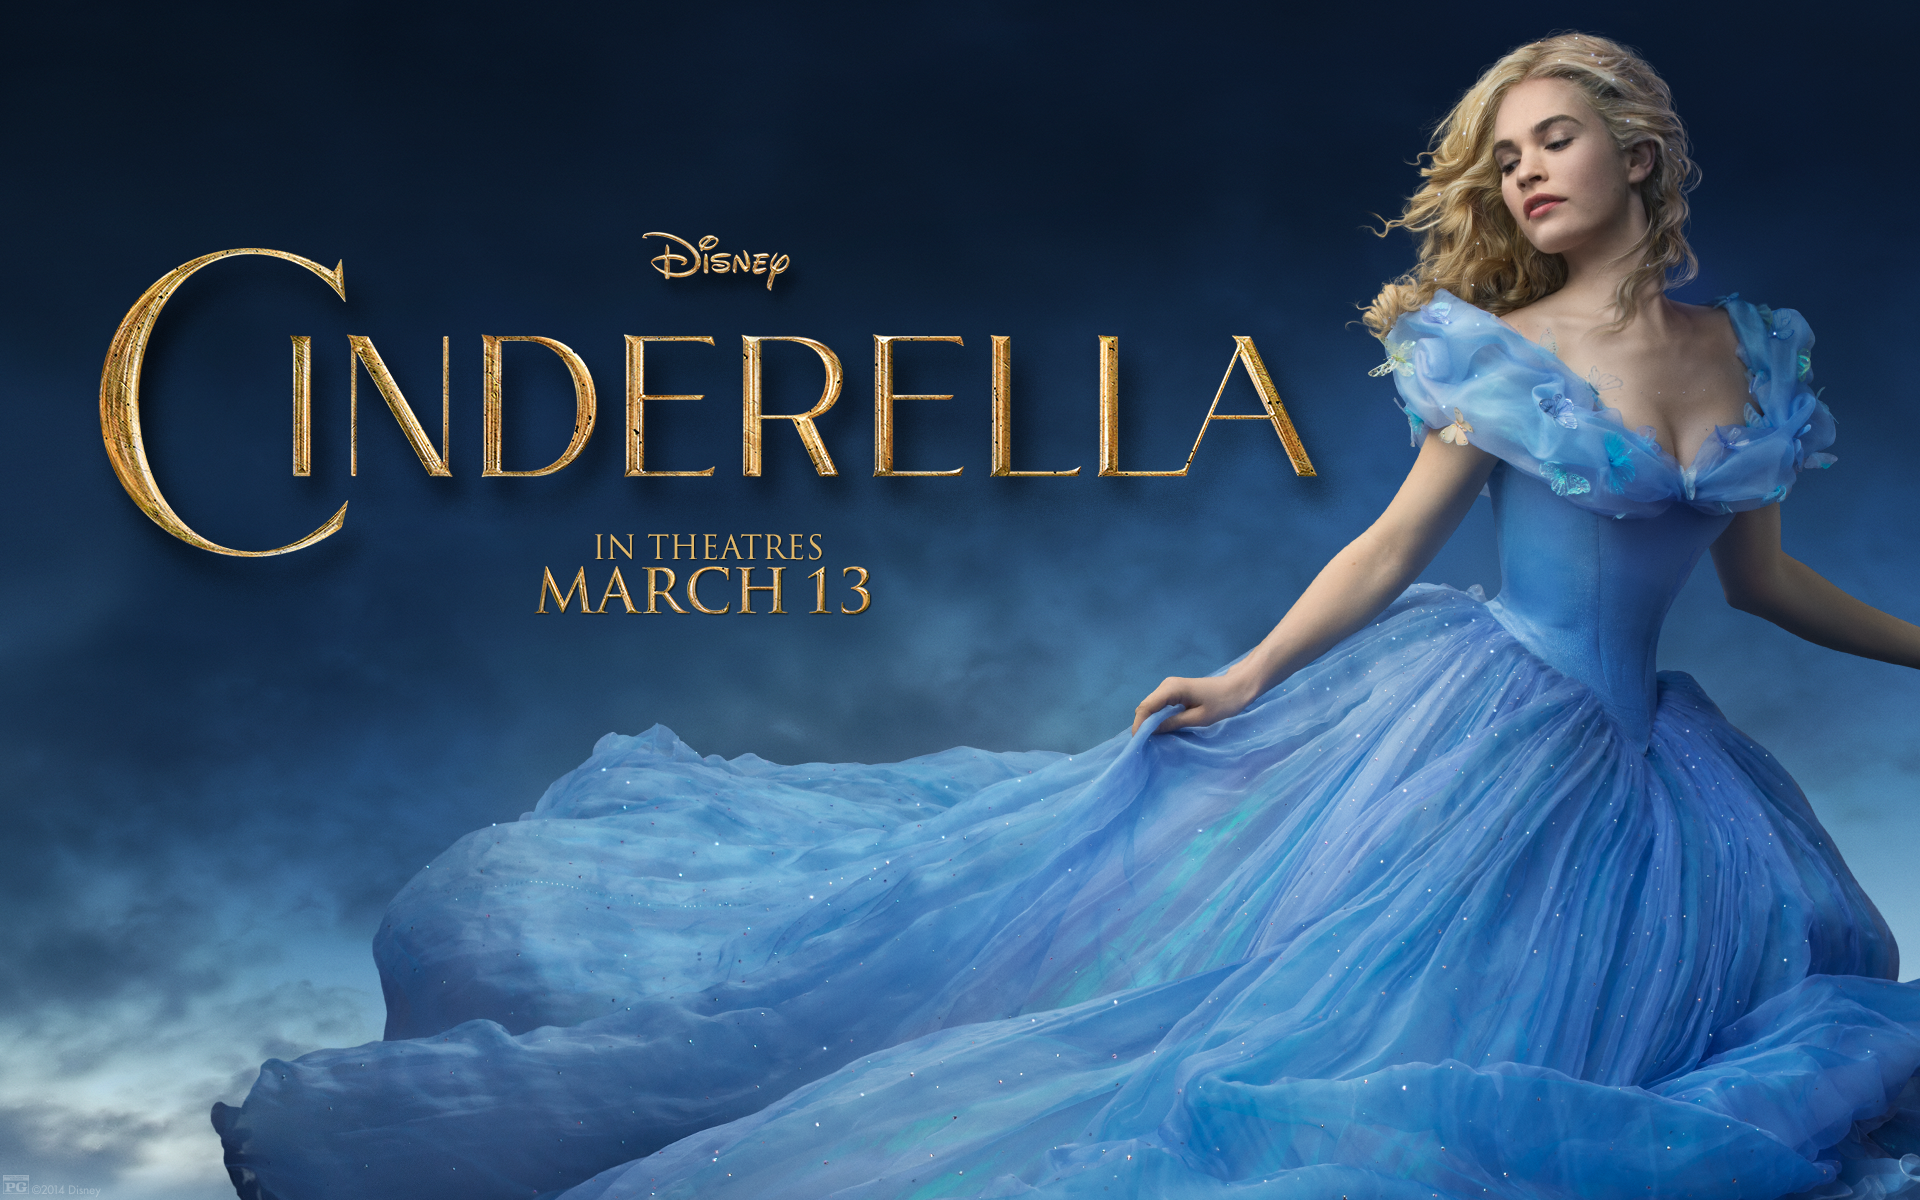 A Review of Disney's Cinderella (Yes, the 2015 One)